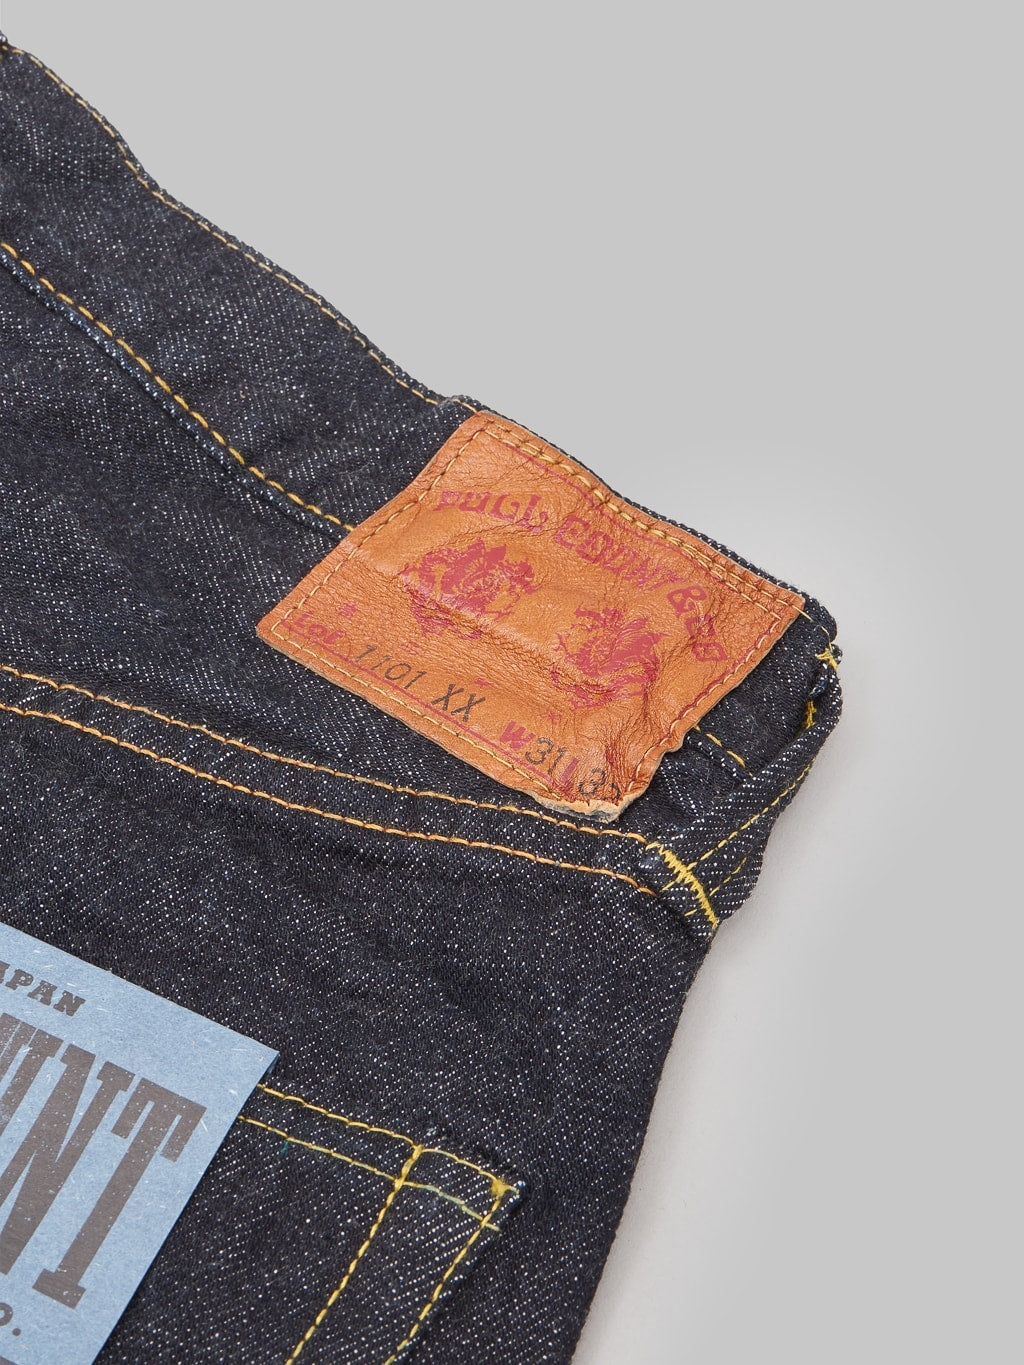 Fullcount 1101XXW regular Straight selvedge Jeans leather patch